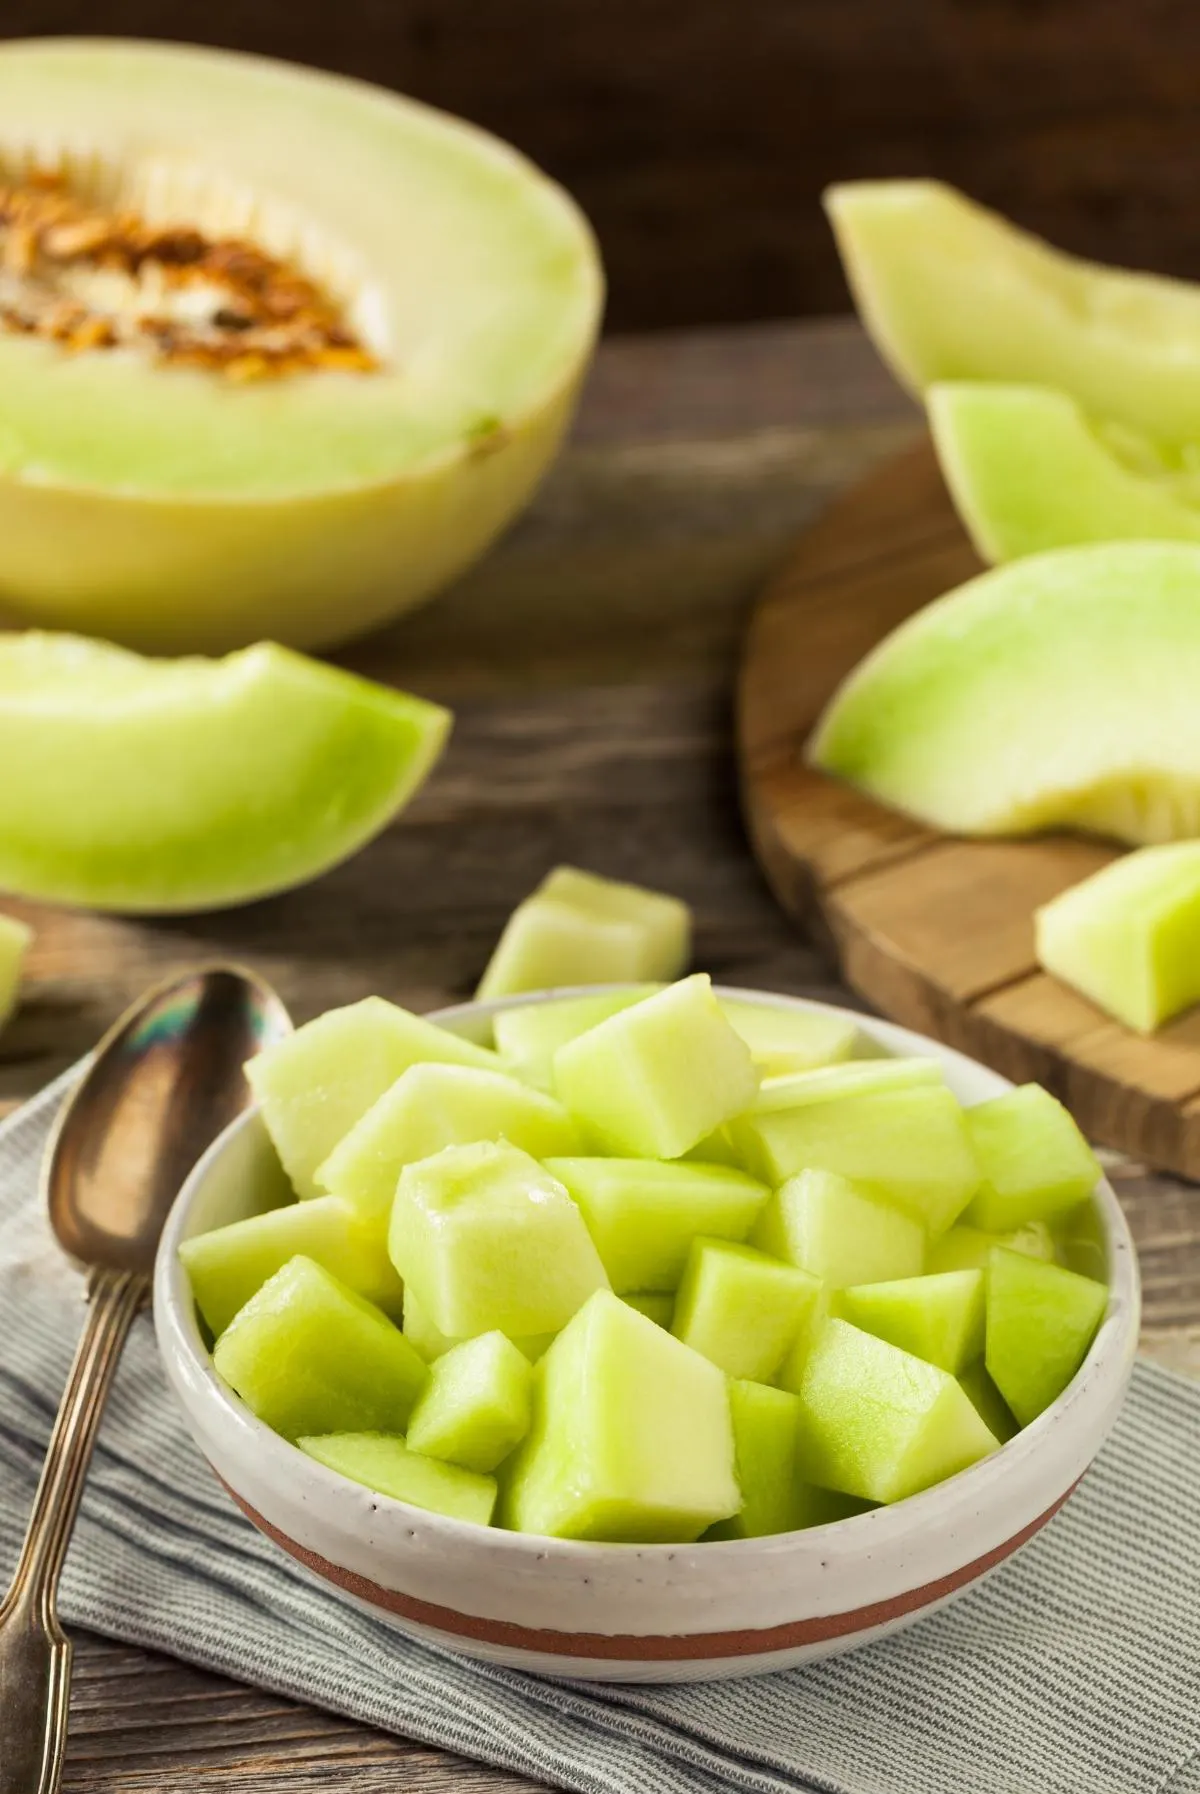 Honeydew melon peeled and chopped in a bowl, ready to be used for smoothie.